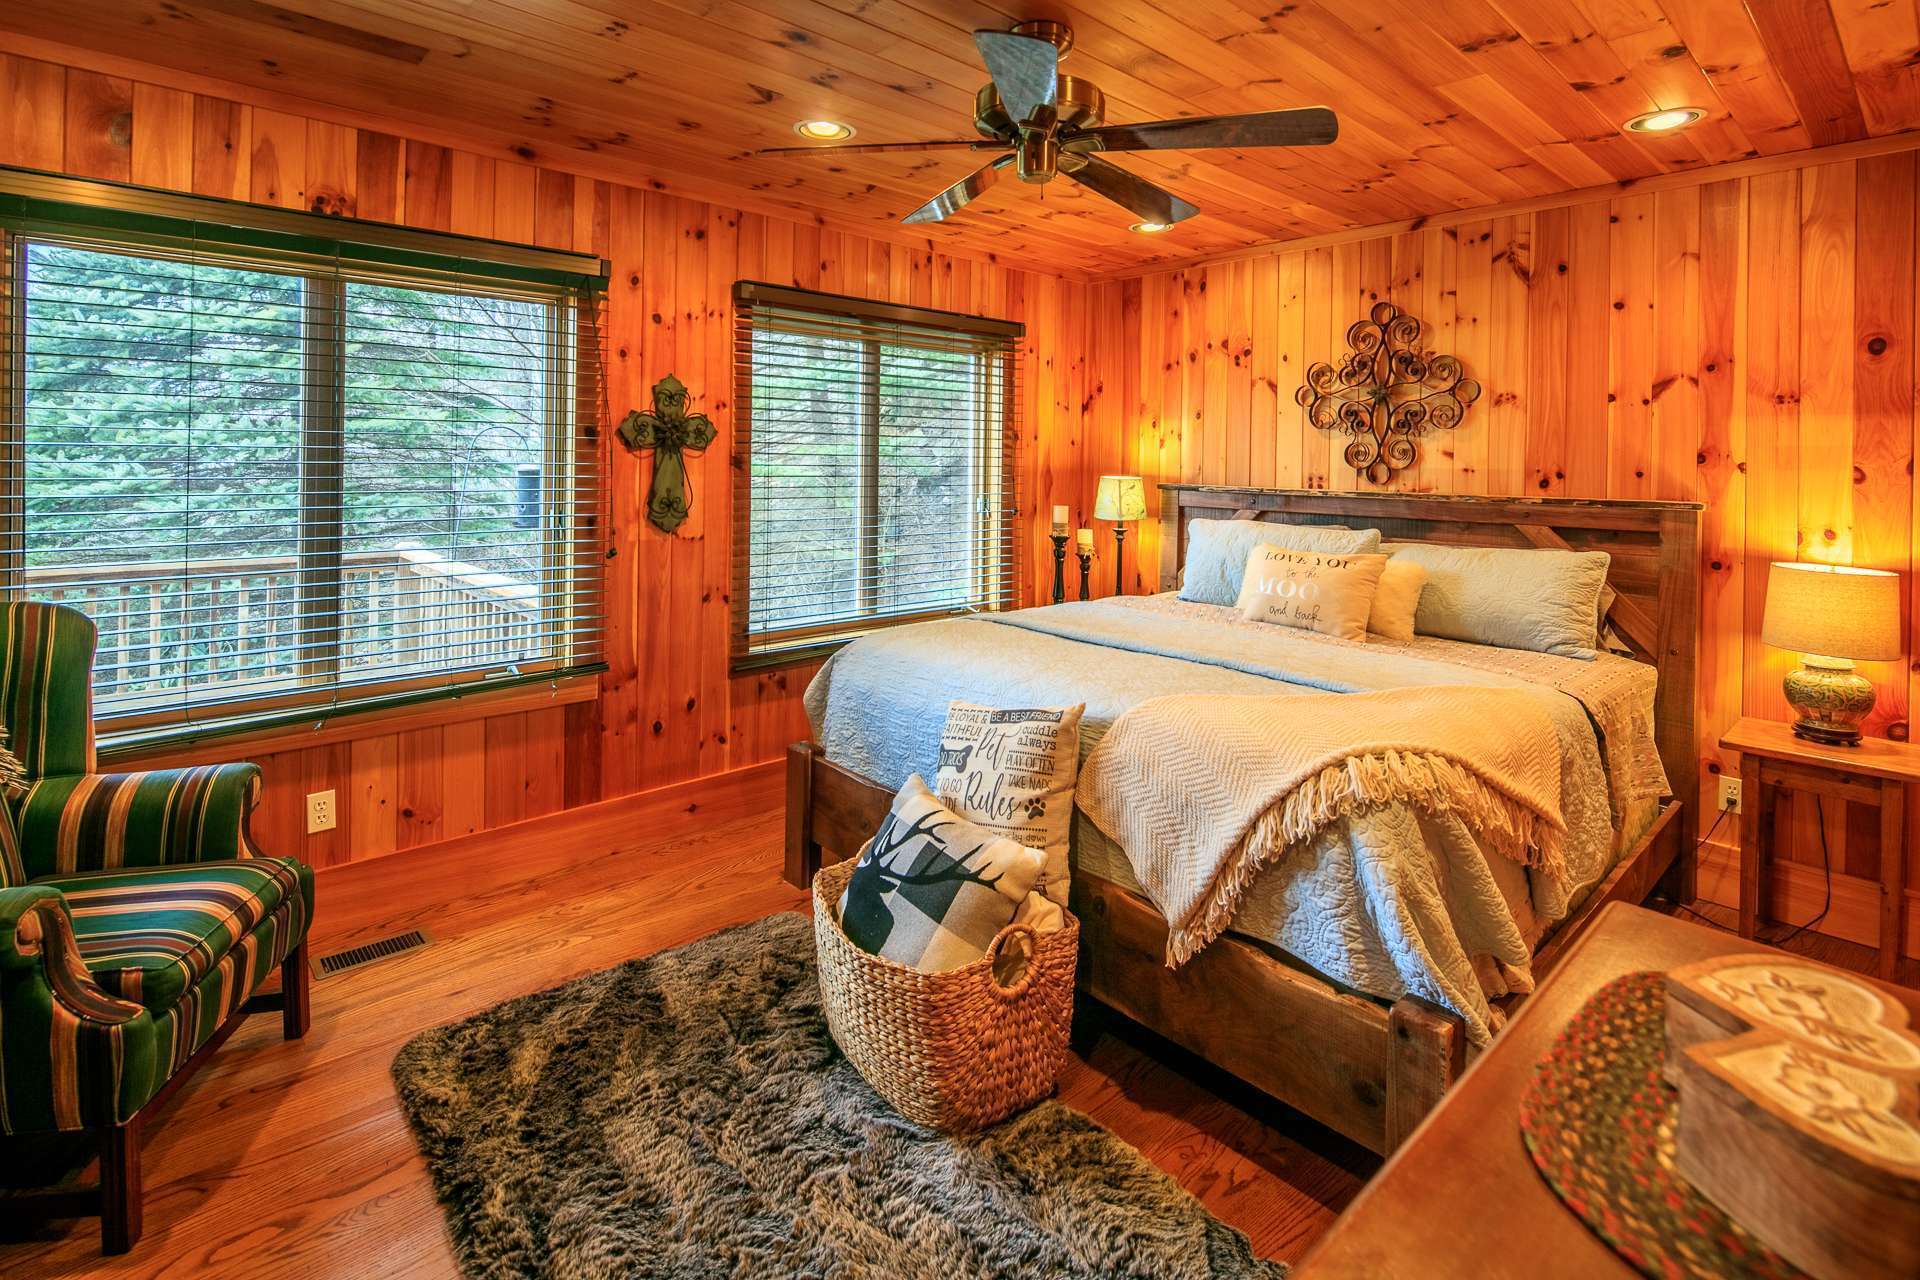 The main level master suite offers a private bath and plenty of windows  to enjoy the outdoor scenery.